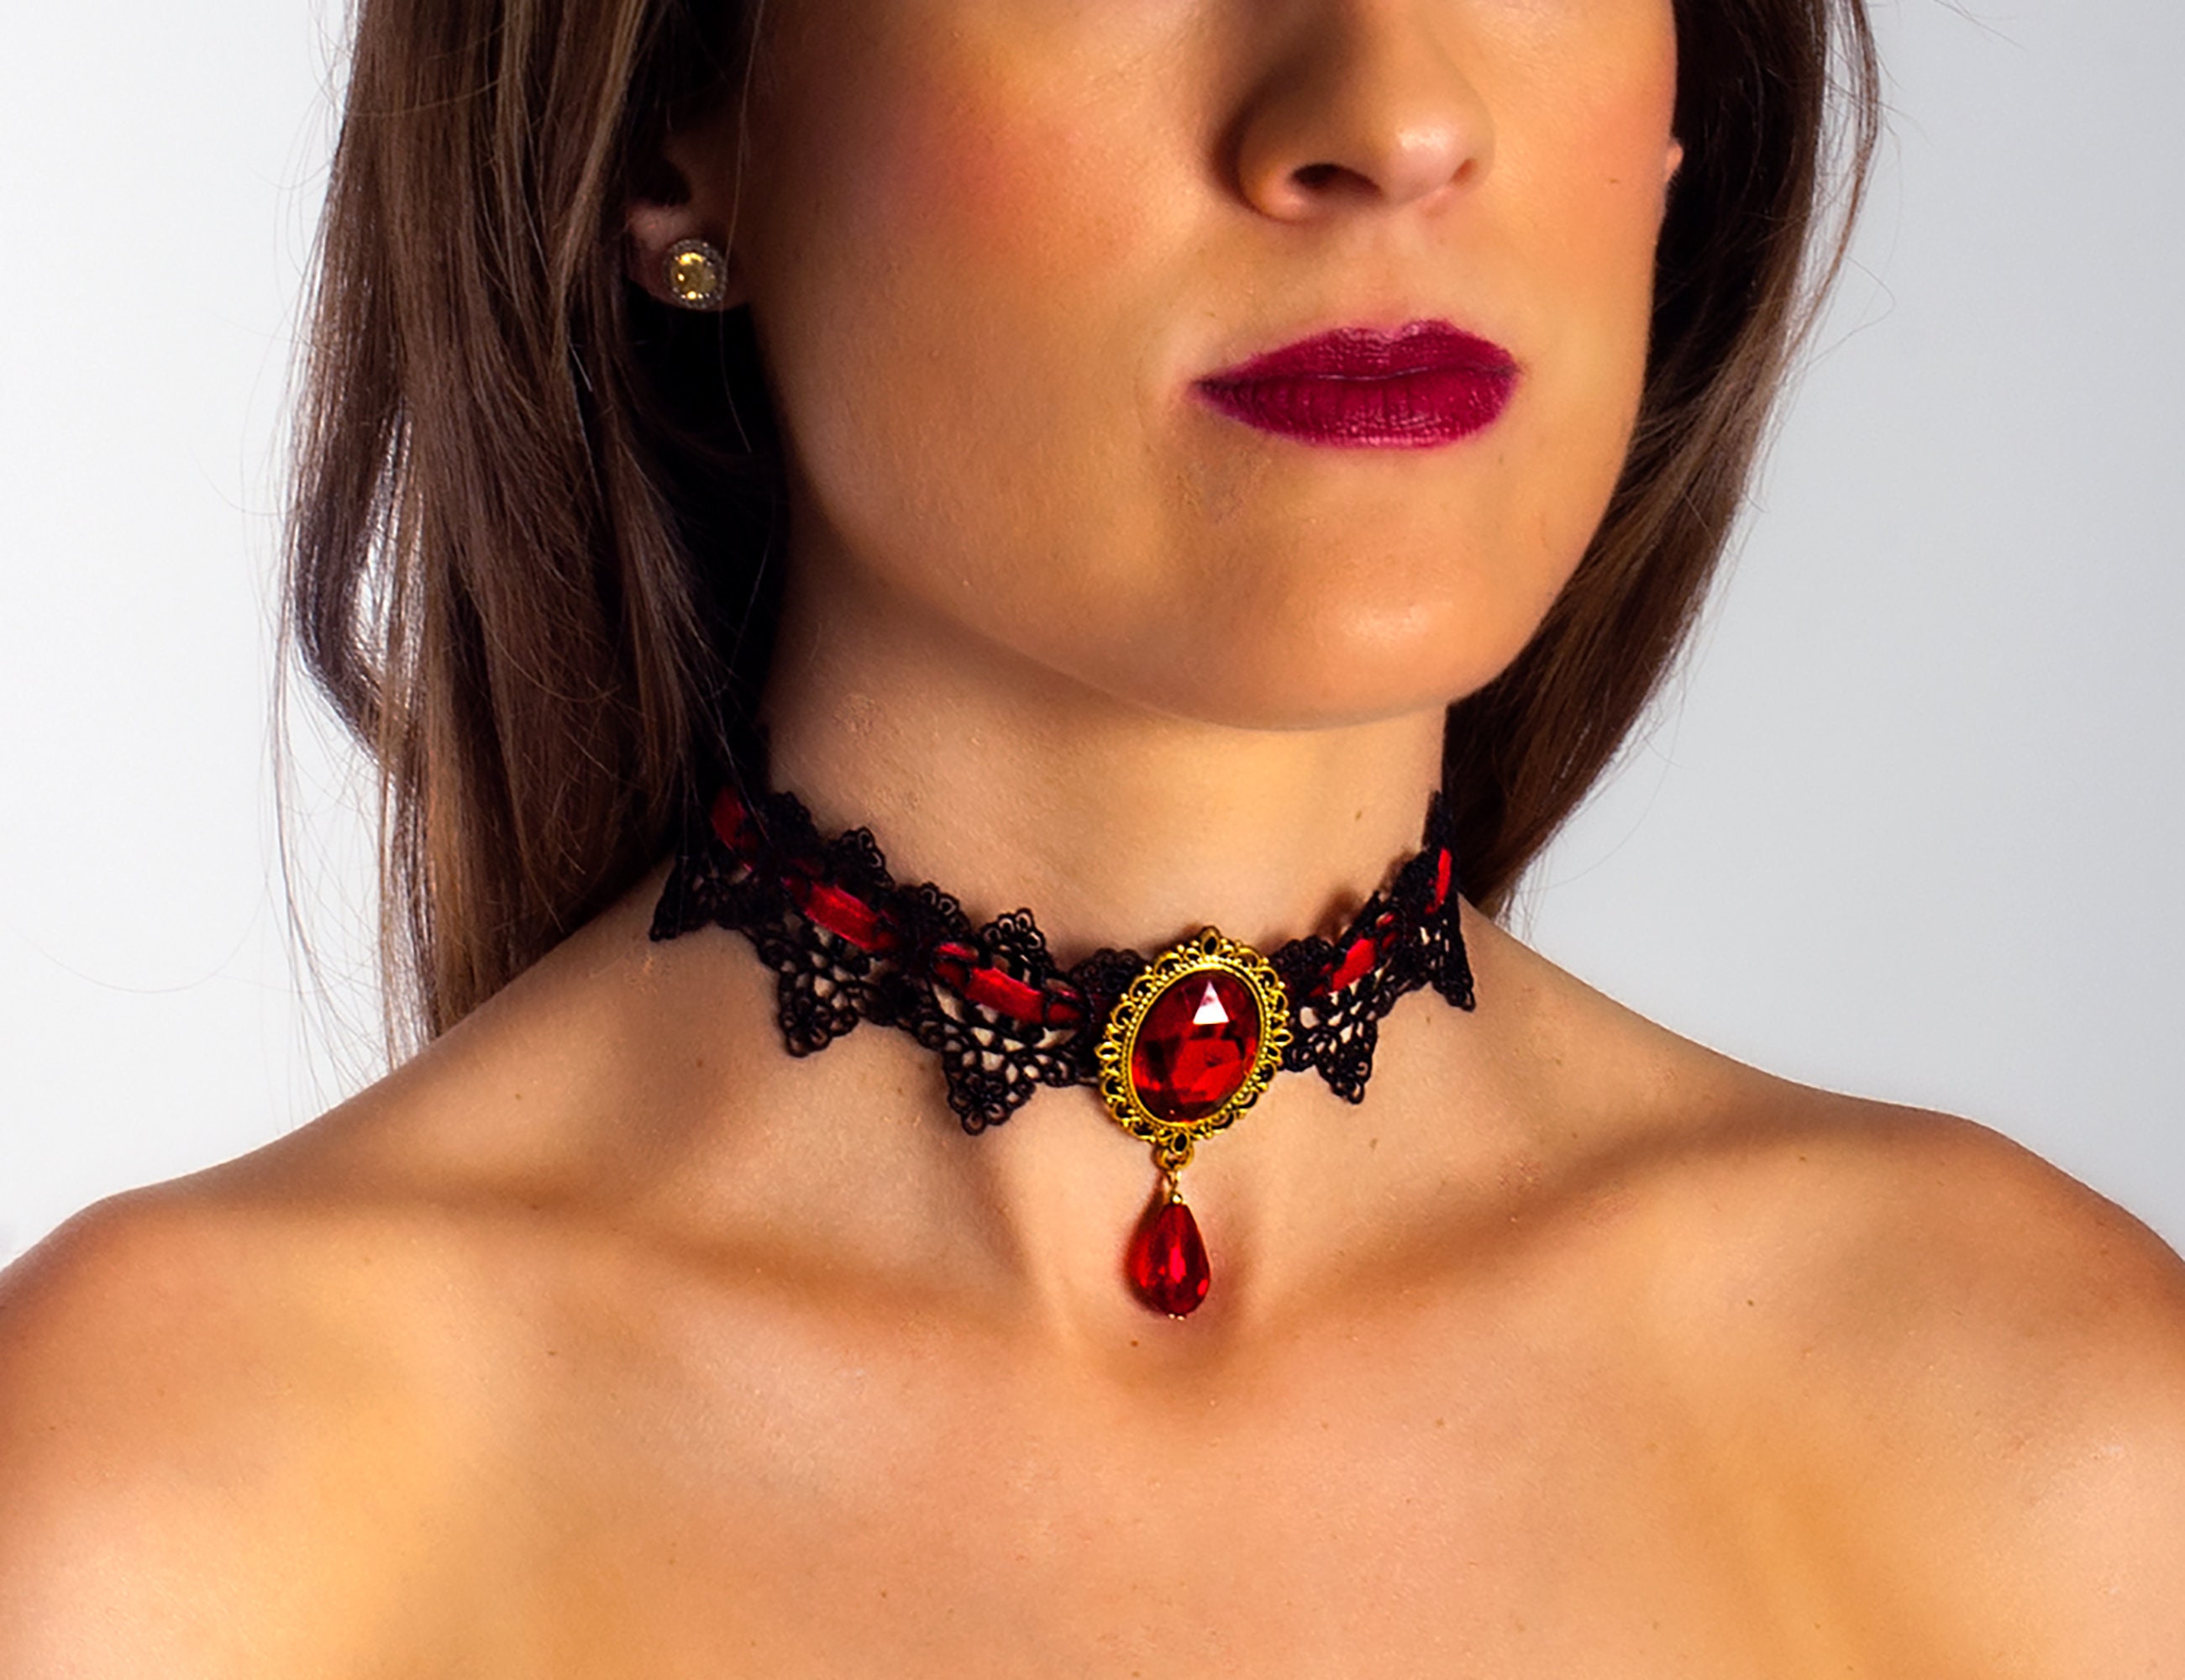 Black Lace Gothic Choker Necklace With Red Bat Design Perfect For Halloween  And Nightmare Before Christmas Womens Layered Gothic Jewelry From Hui05,  $9.4